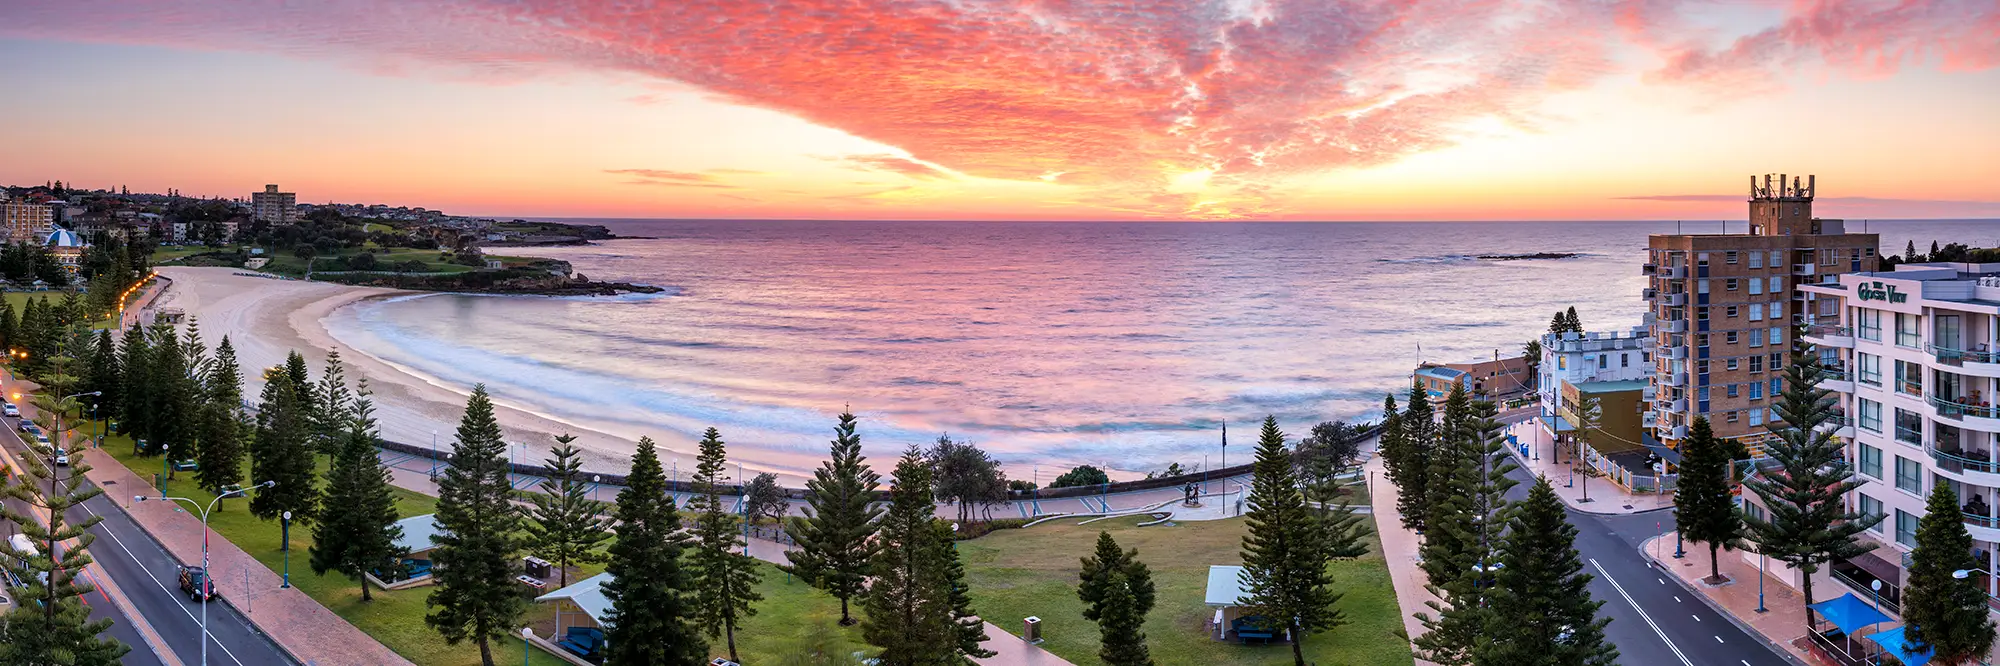 Coogee Beach Red Dawn Sunrise Images